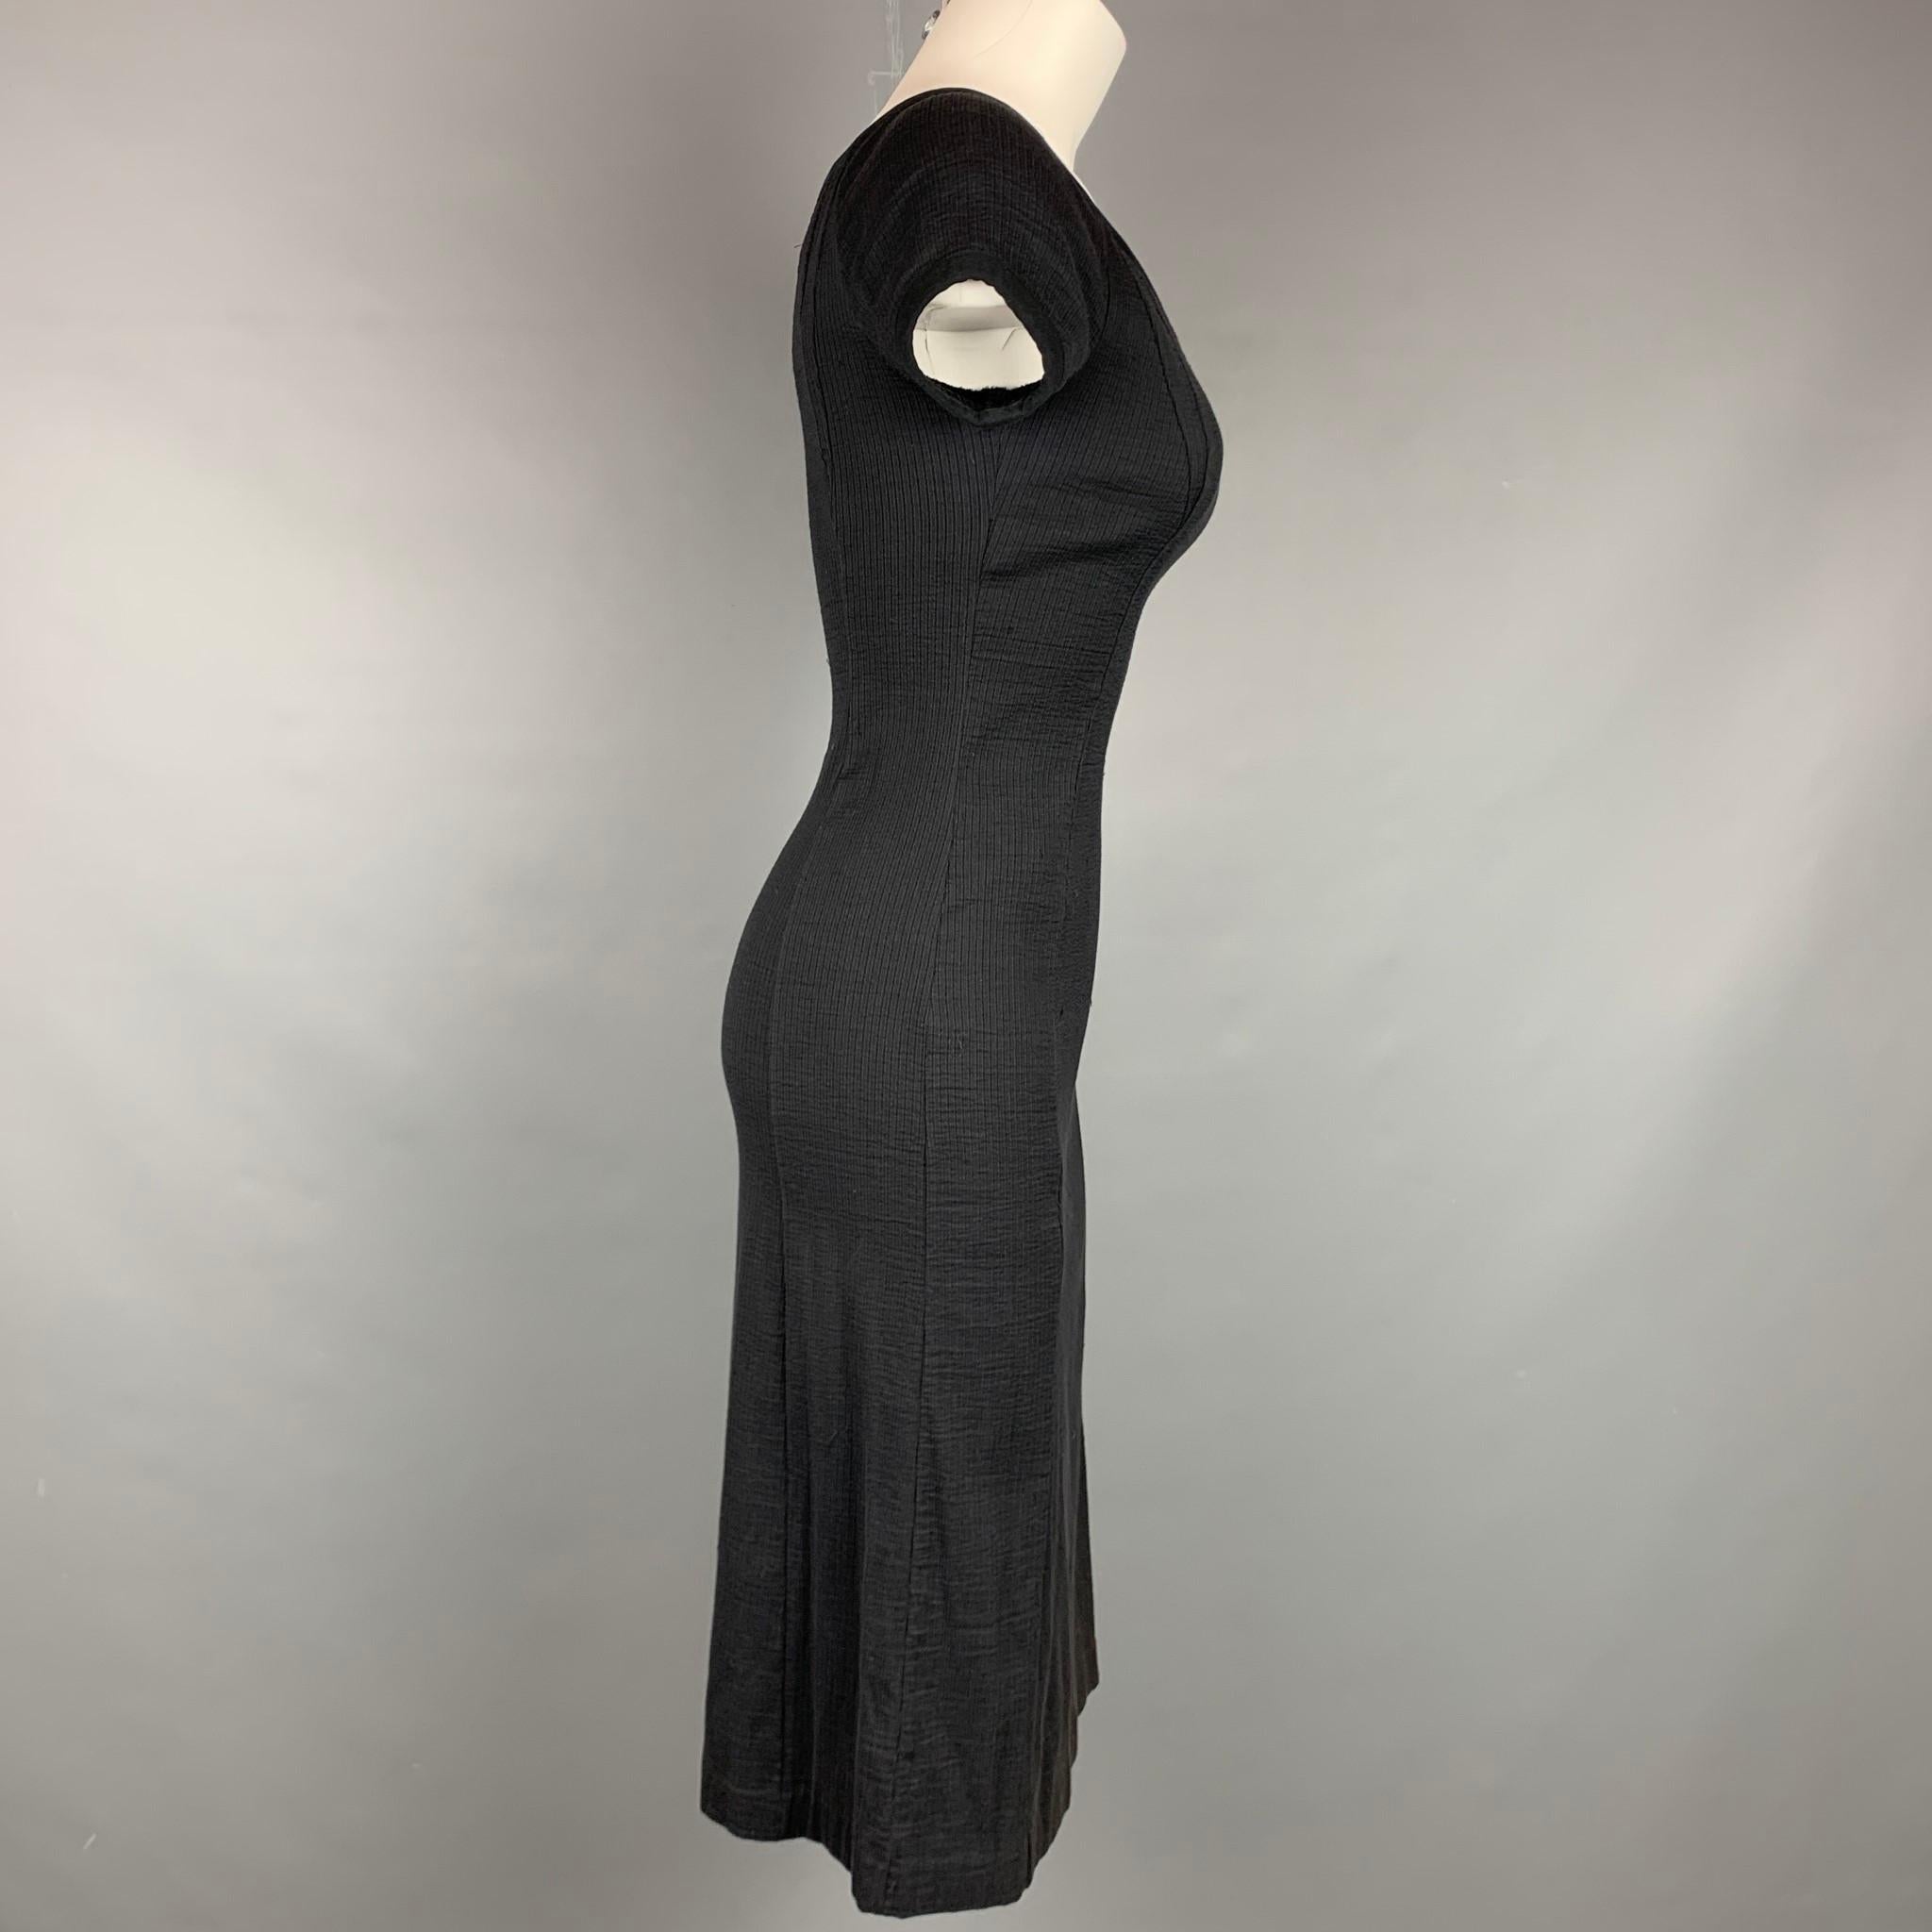 NARCISO RODRIGUEZ dress comes in a black ribbed cotton / polyamide featuring short sleeves and a v-neck. Made in Italy.

Very Good Pre-Owned Condition.
Marked: I 38 / F 34 / D 34 / GB 6 / USA 2

Measurements:

Shoulder: 10 in.
Bust: 30 in.
Waist: 26